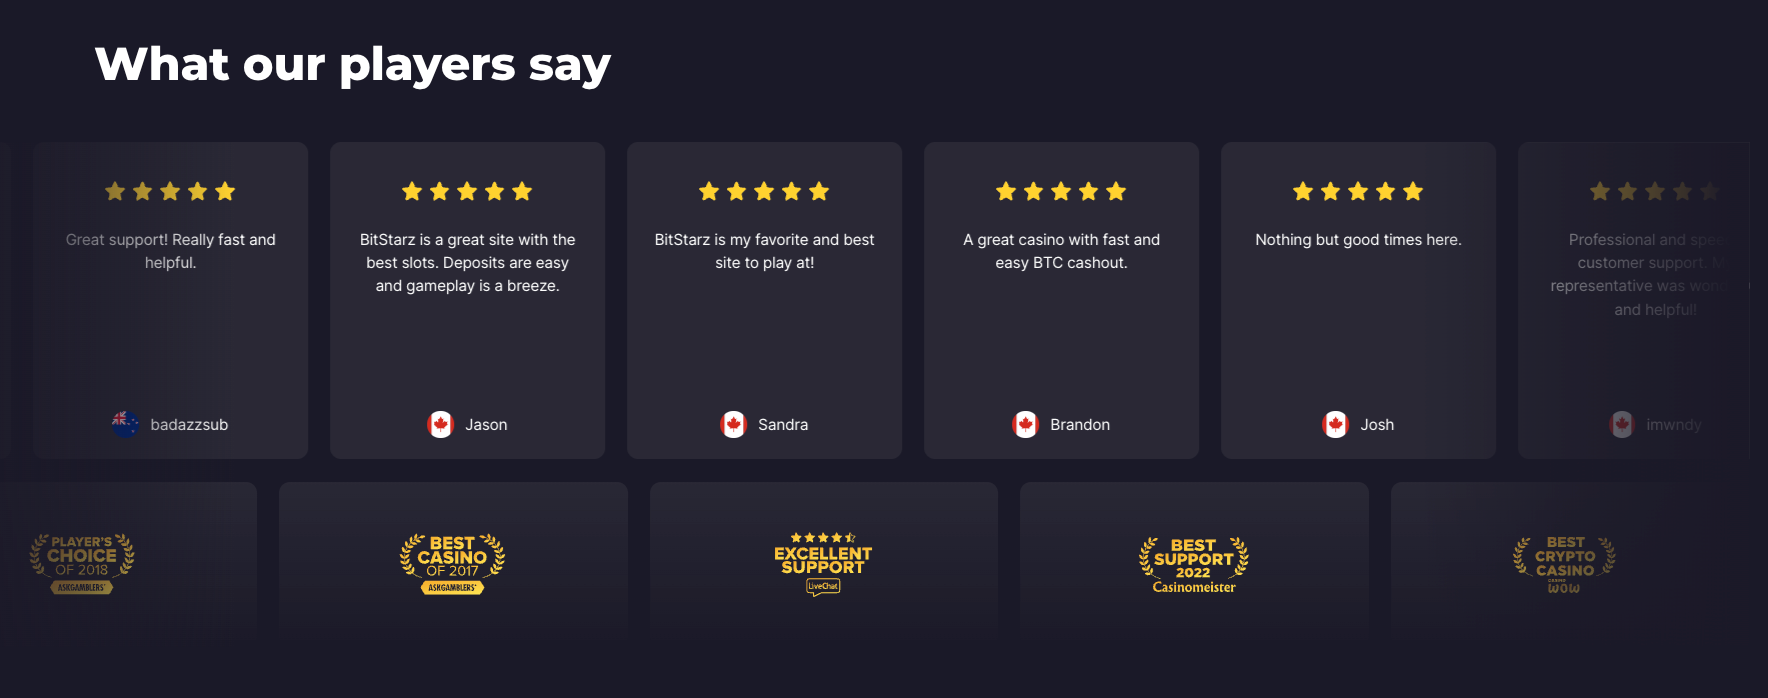 bitstarz casino review: safer than other online casinos and most games are fair